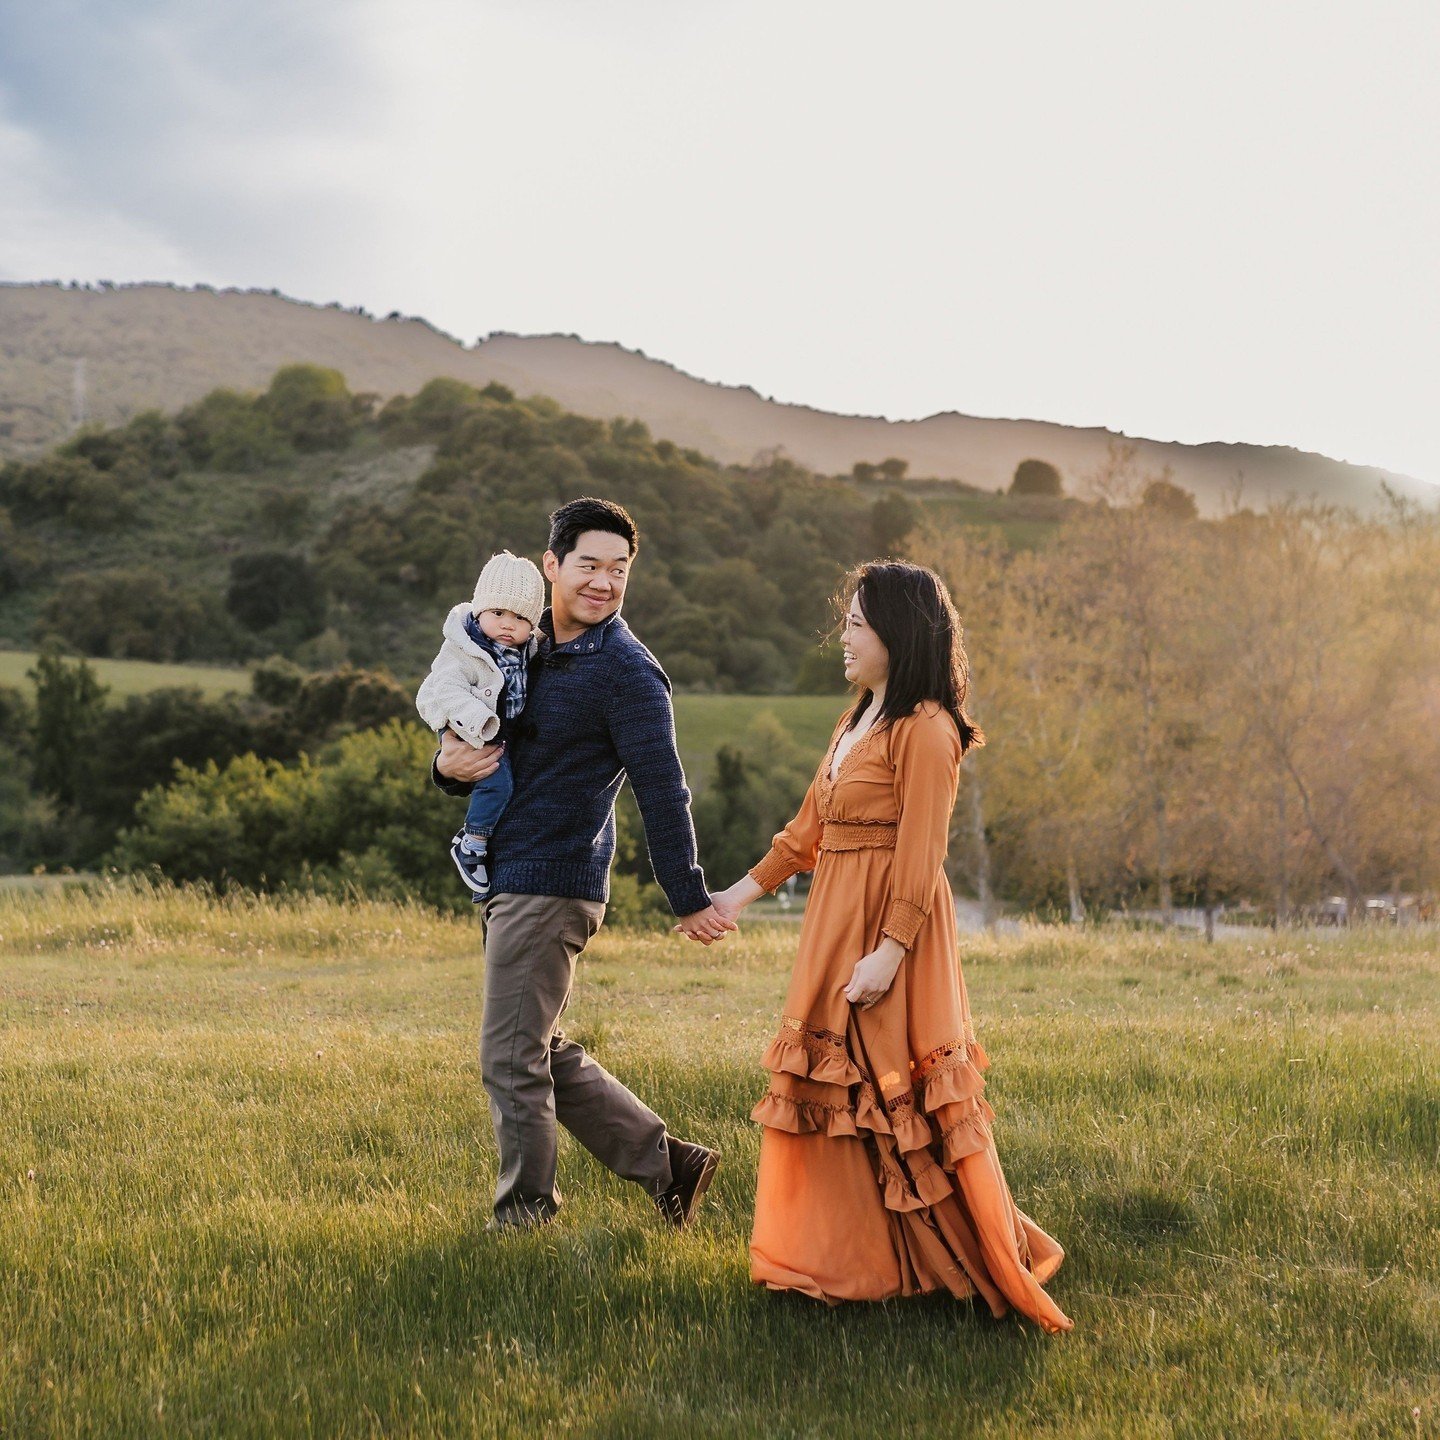 I enjoyed so much doing this session; the sunset, the colors, and this beautiful family created magic in the photos!! The baby boy was so calm and relaxed. ⁠
⁠
The baby pacifier brought back so many memories! My little boy was obsessed with pacifiers